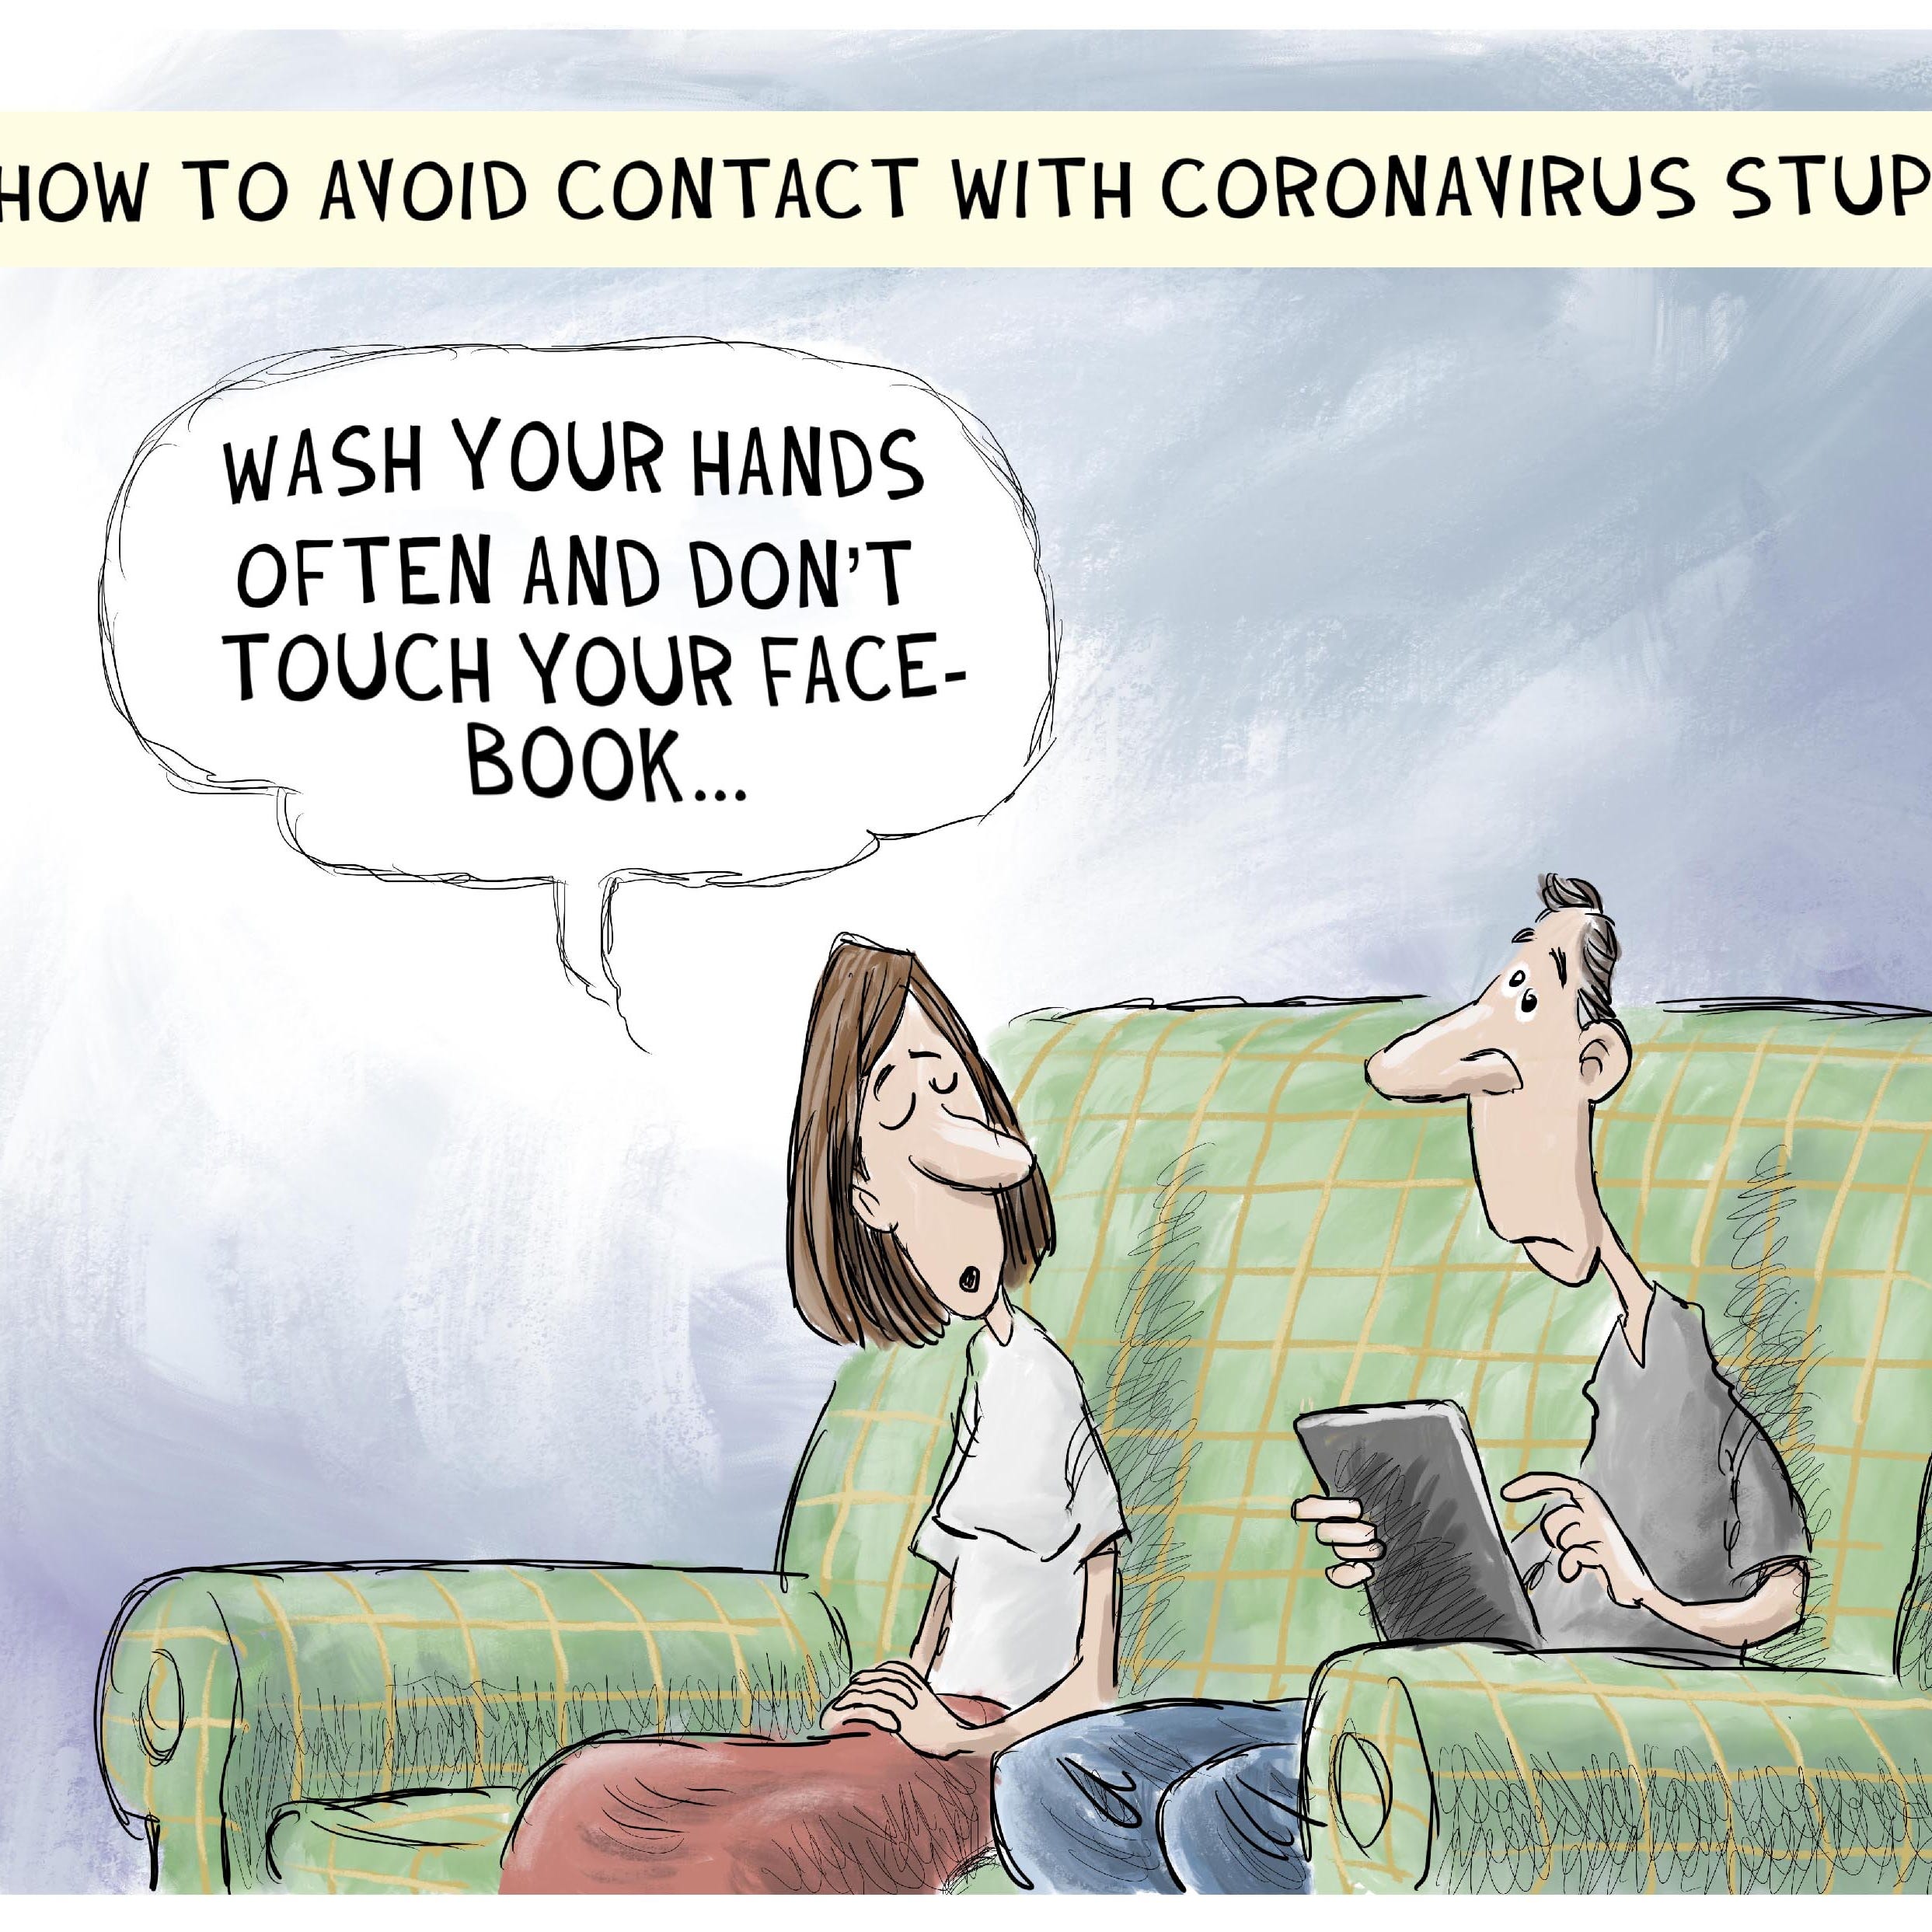 All The Latest And Funniest Coronavirus Memes Right Here Updated Daily Wititudes